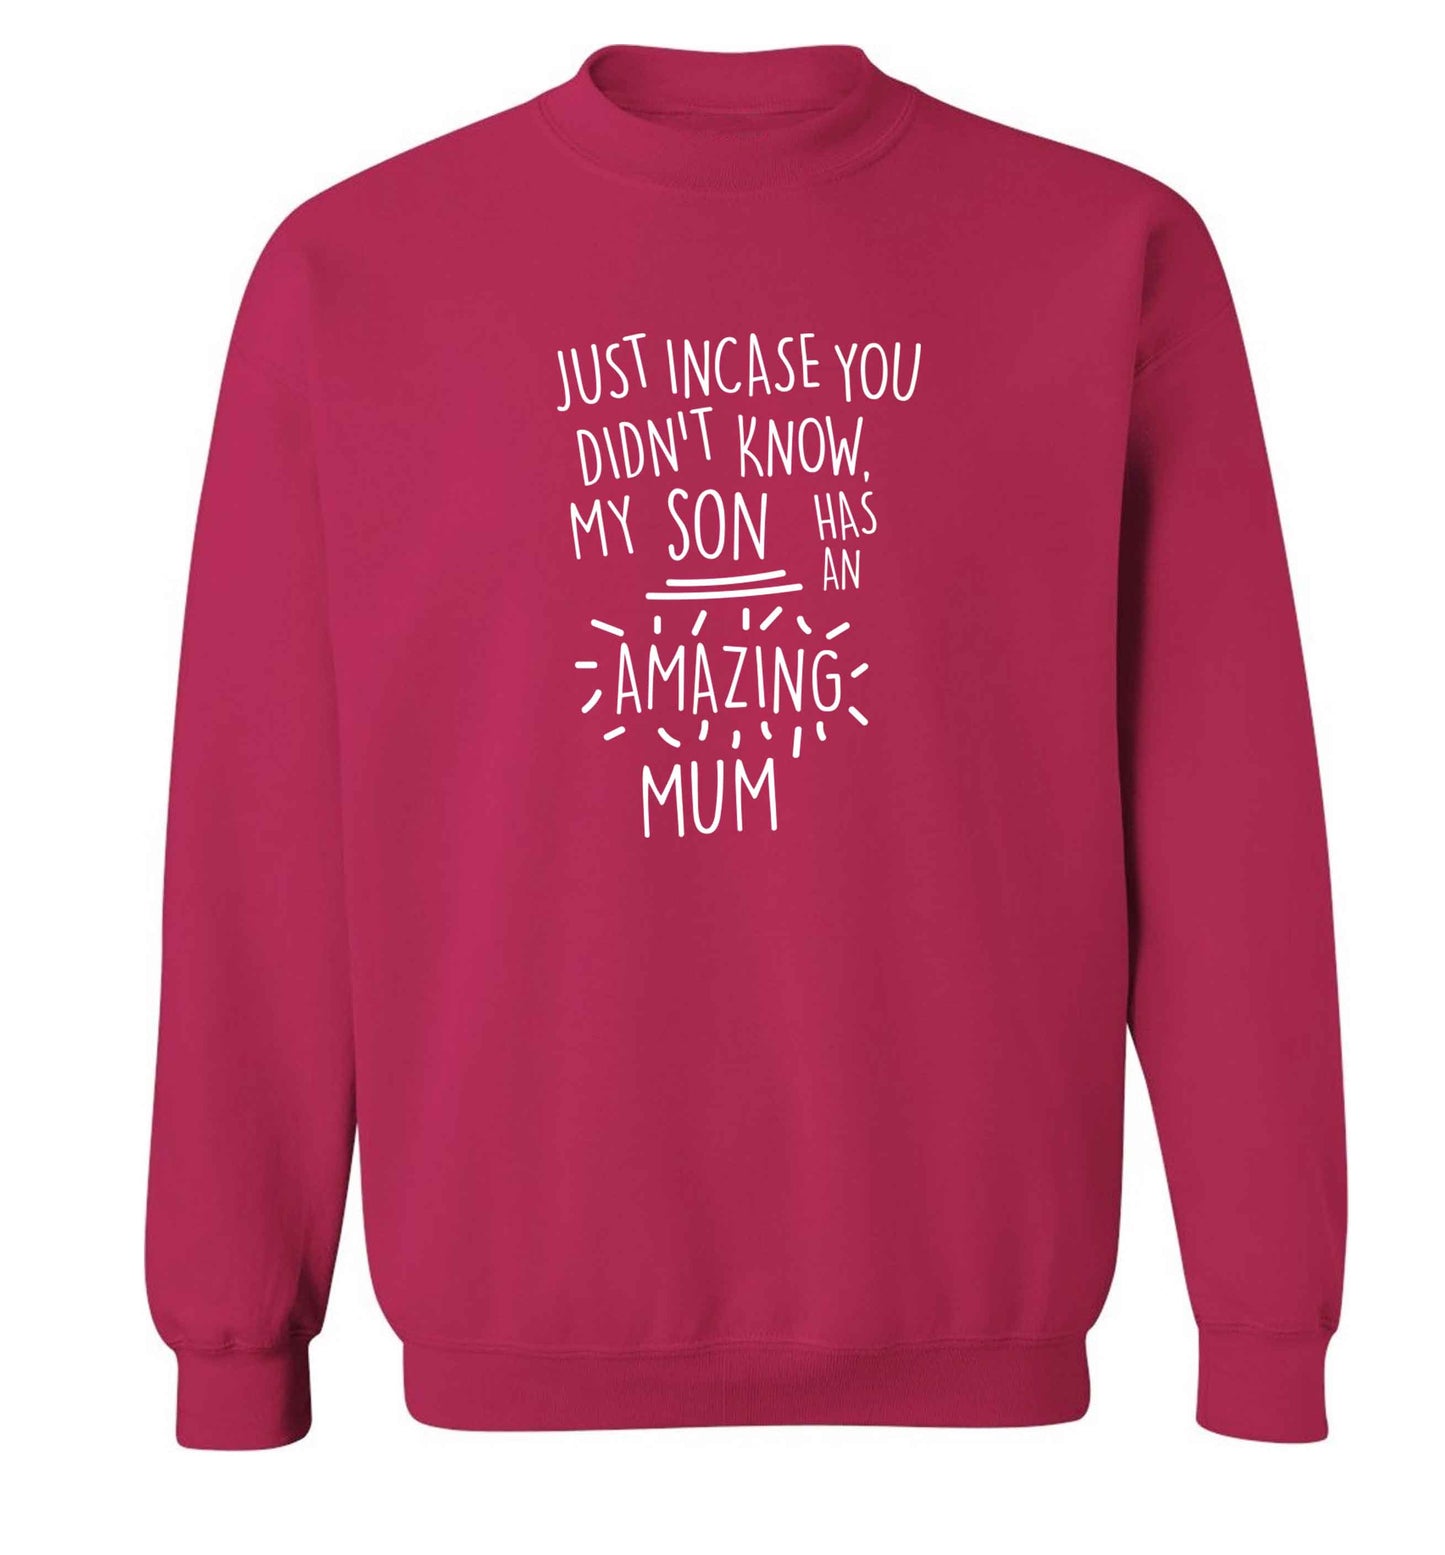 Just incase you didn't know my son has an amazing mum adult's unisex pink sweater 2XL